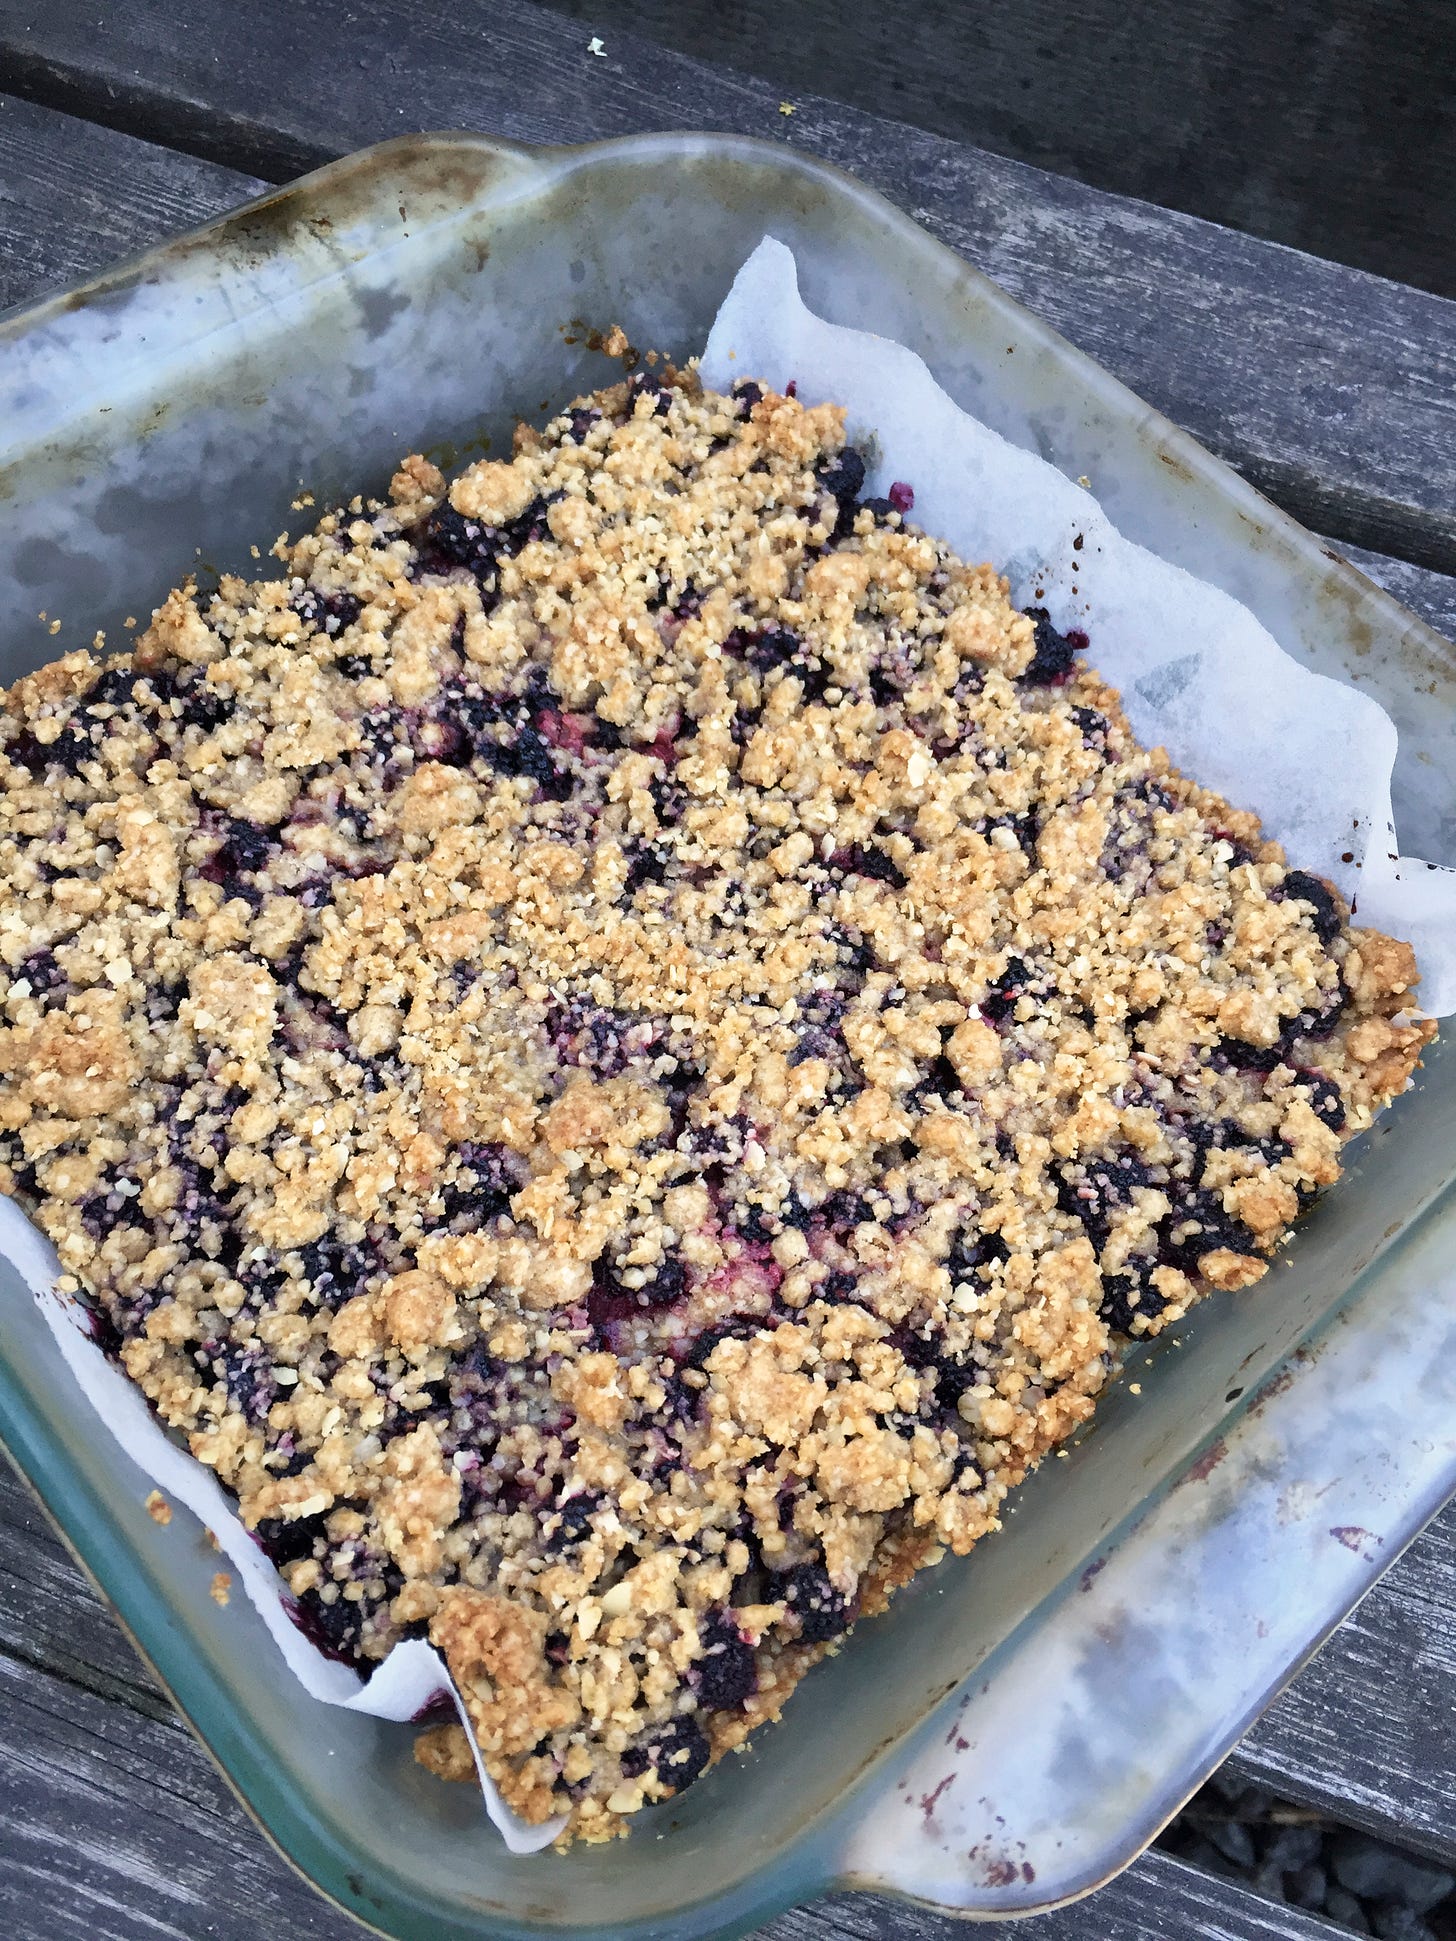 A clear glass pan of the raspberry crumb bars. Black berry filling is visible through the crumble topping.